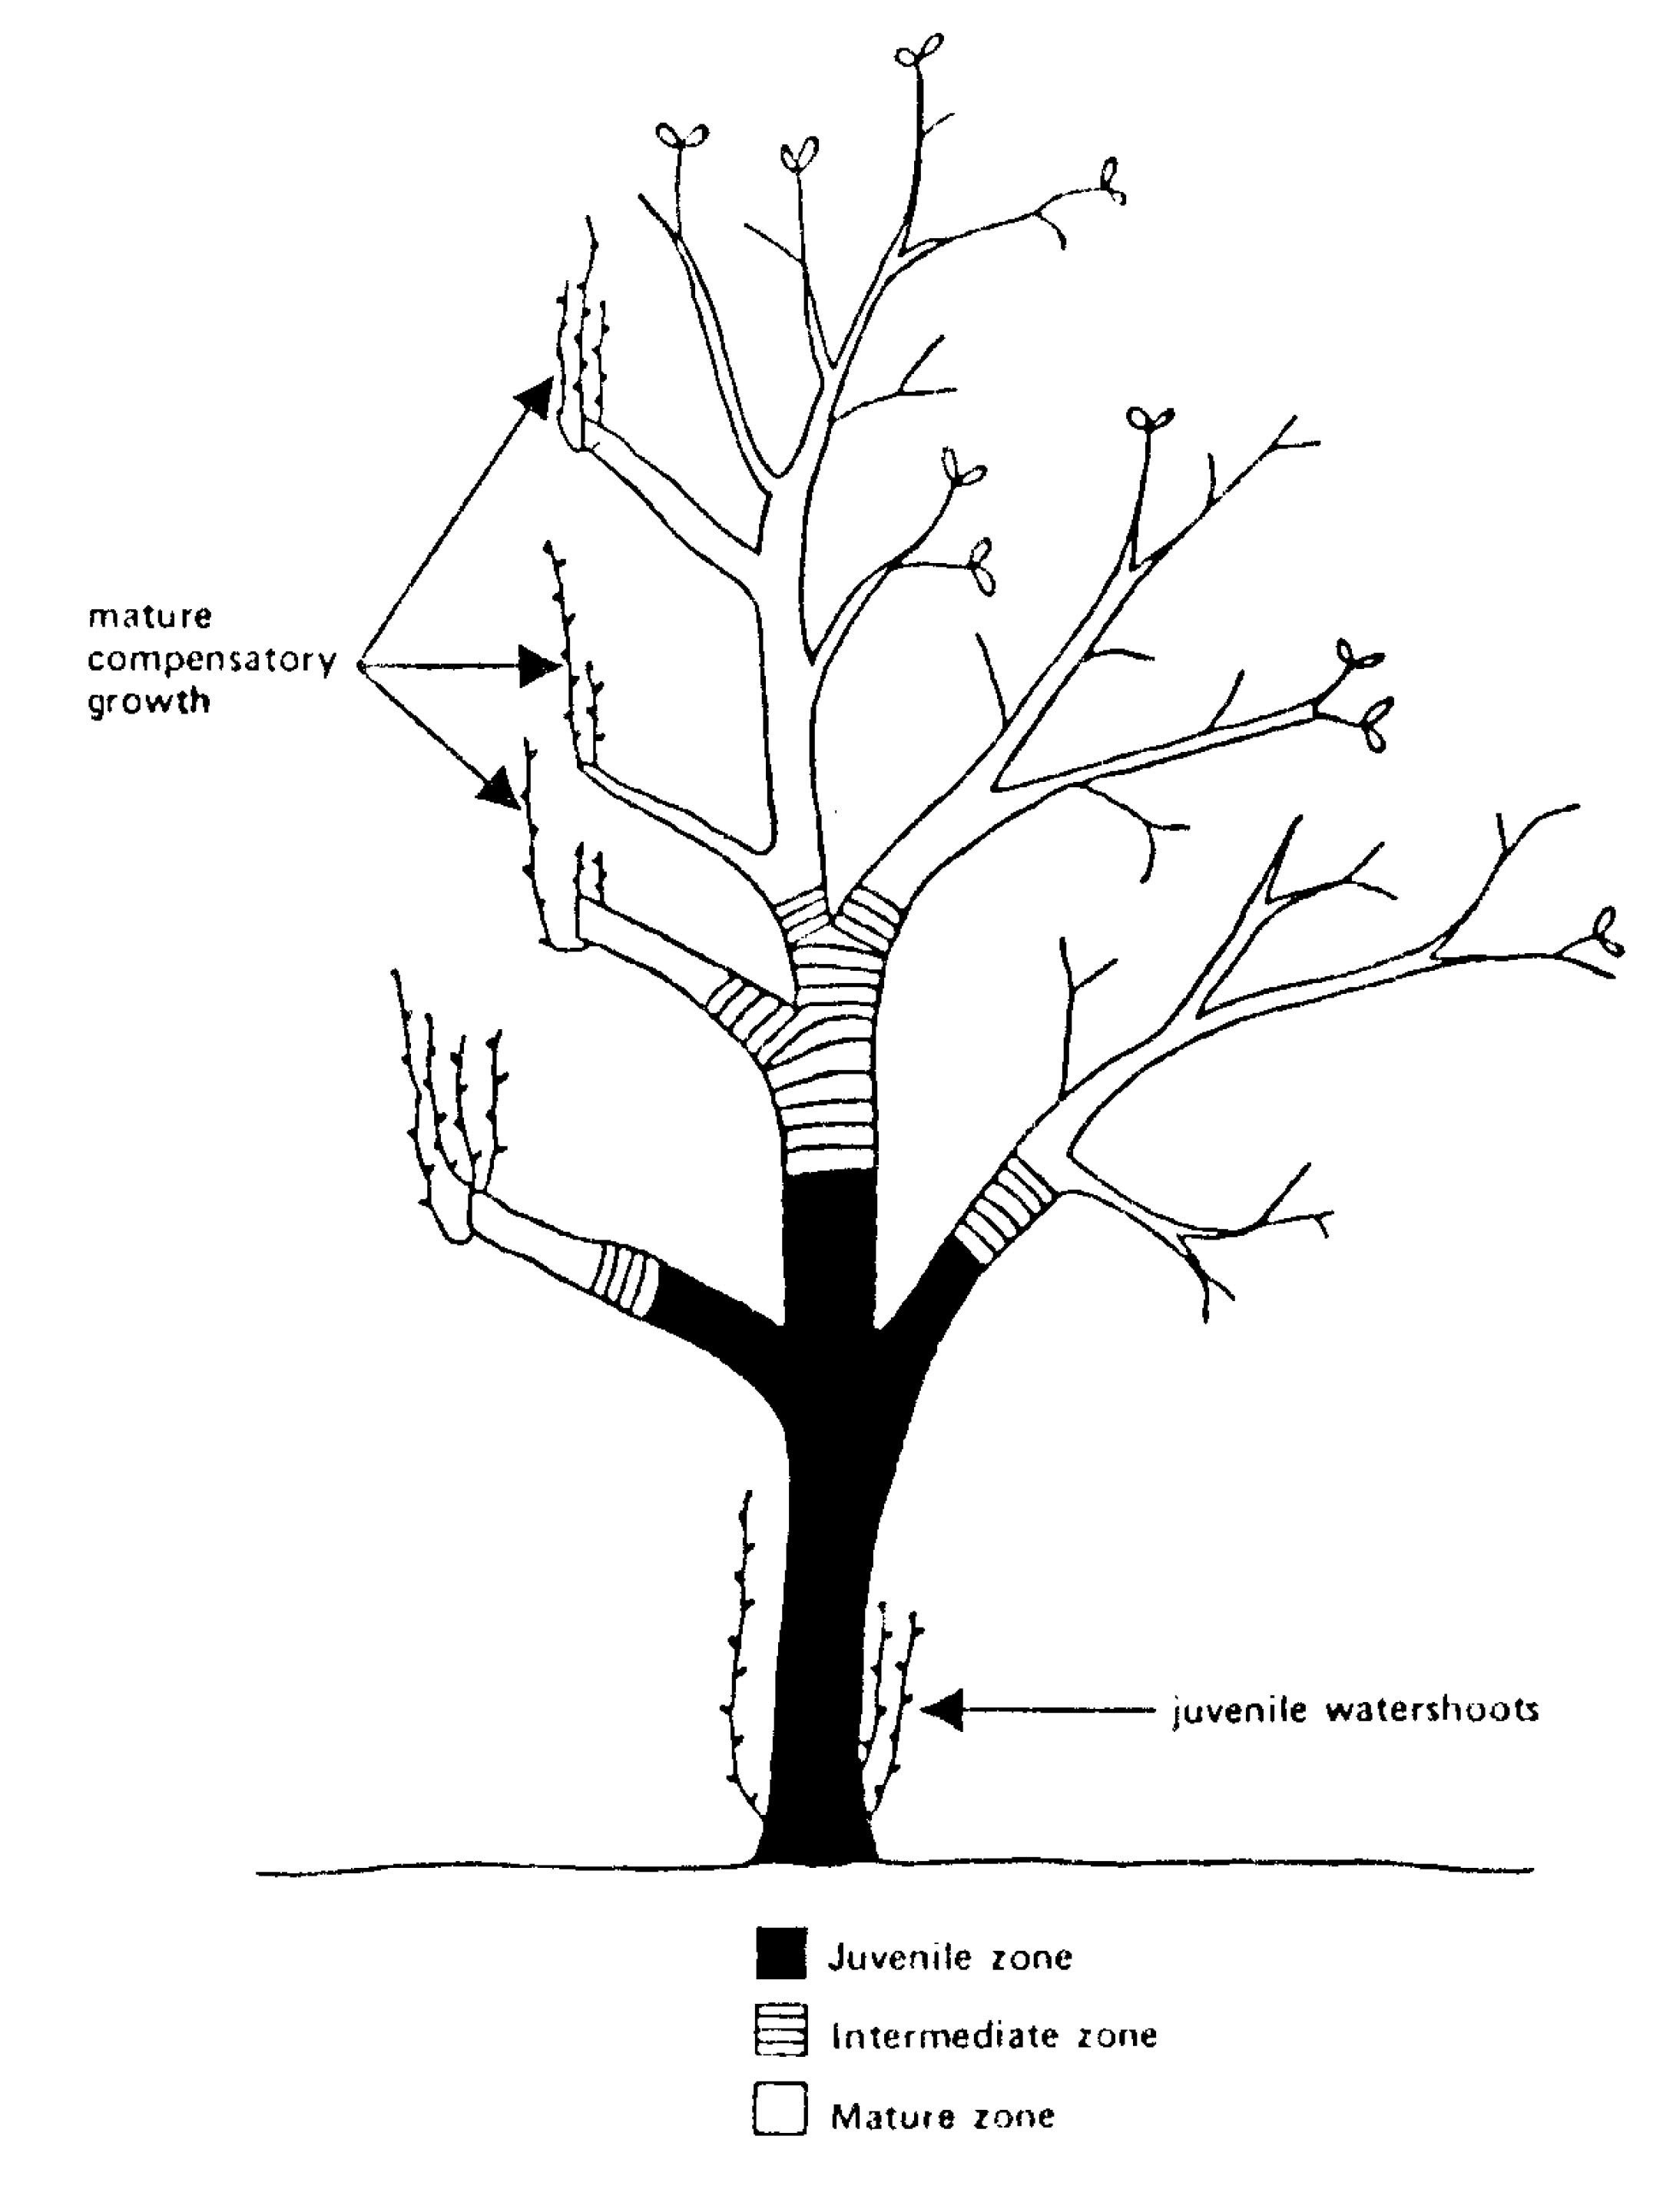 Topophysis effects in seedling trees. 